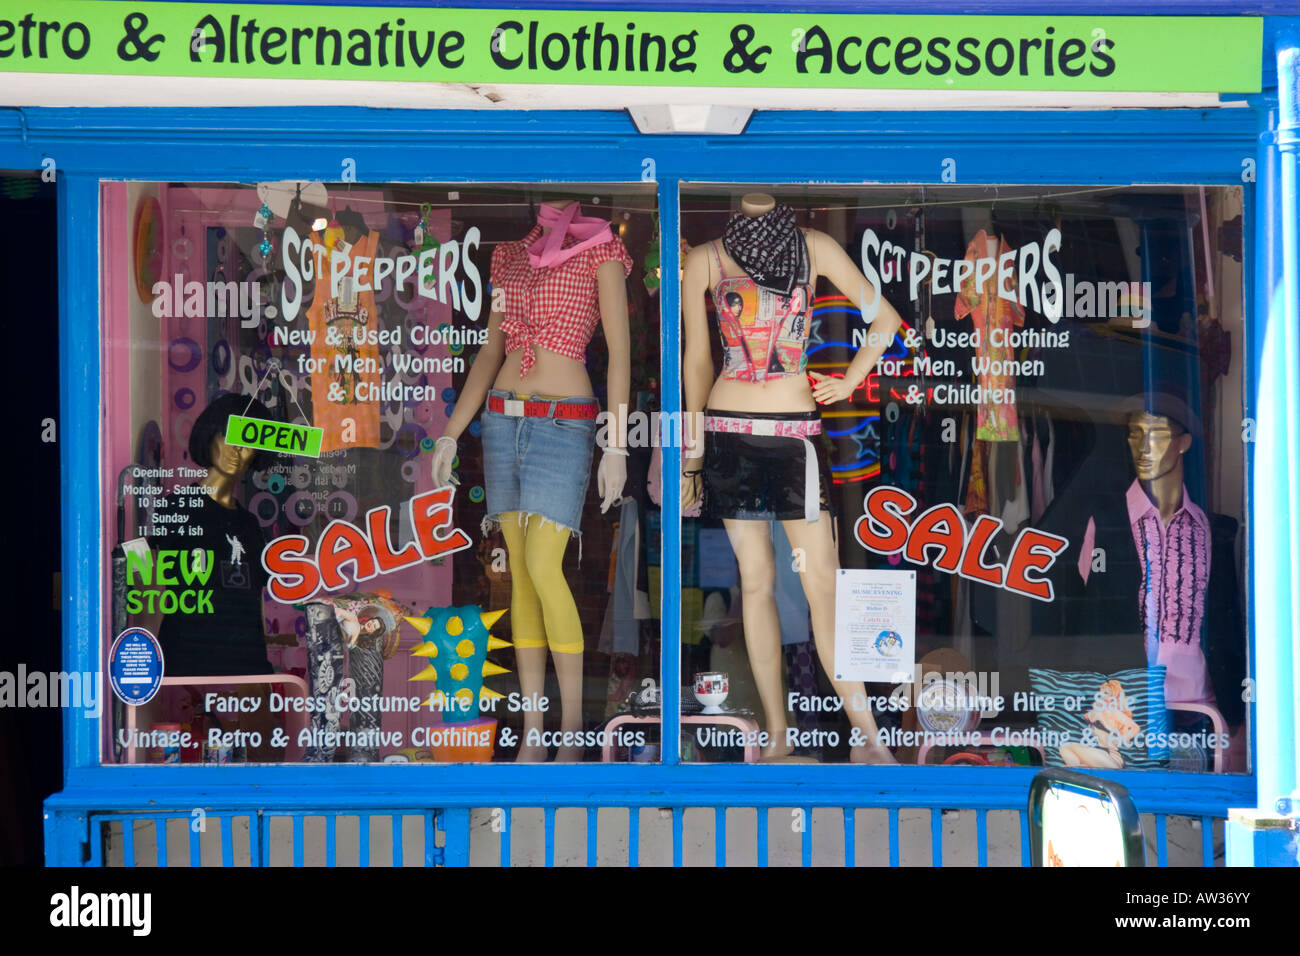 Vintage retro and alternative clothing and accessories shop window Stock Photo